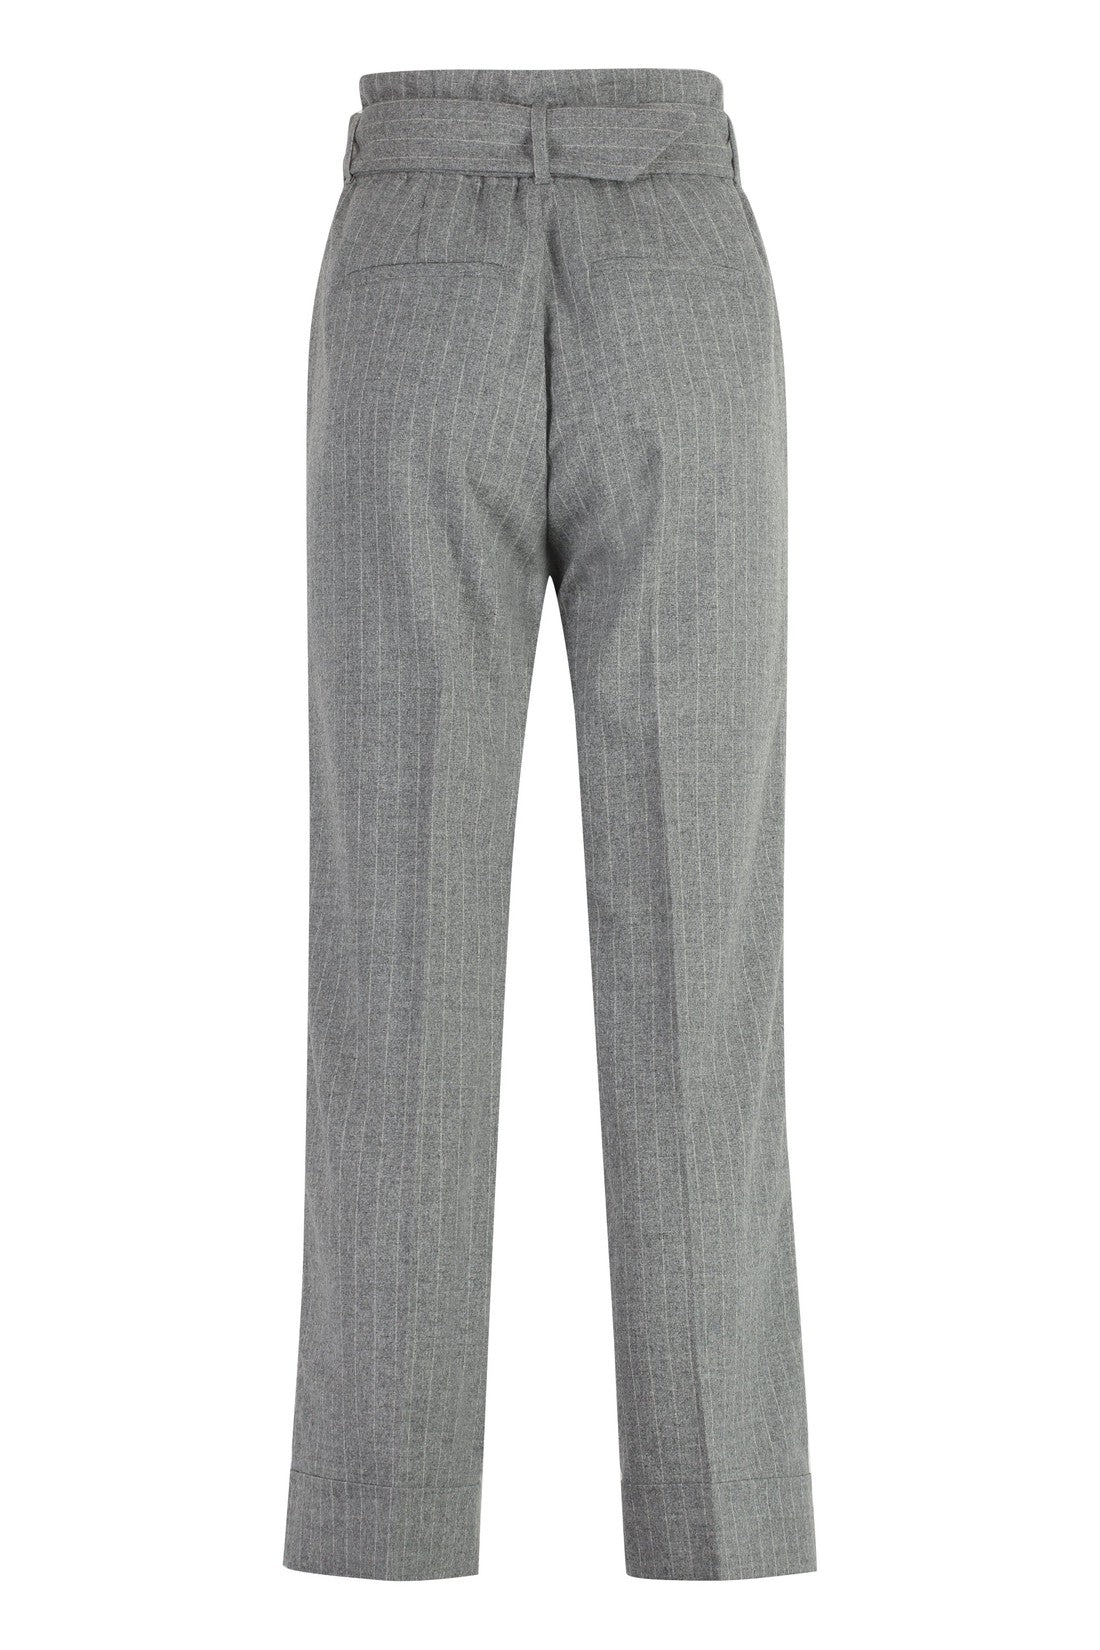 Peserico-OUTLET-SALE-Wool blend trousers-ARCHIVIST